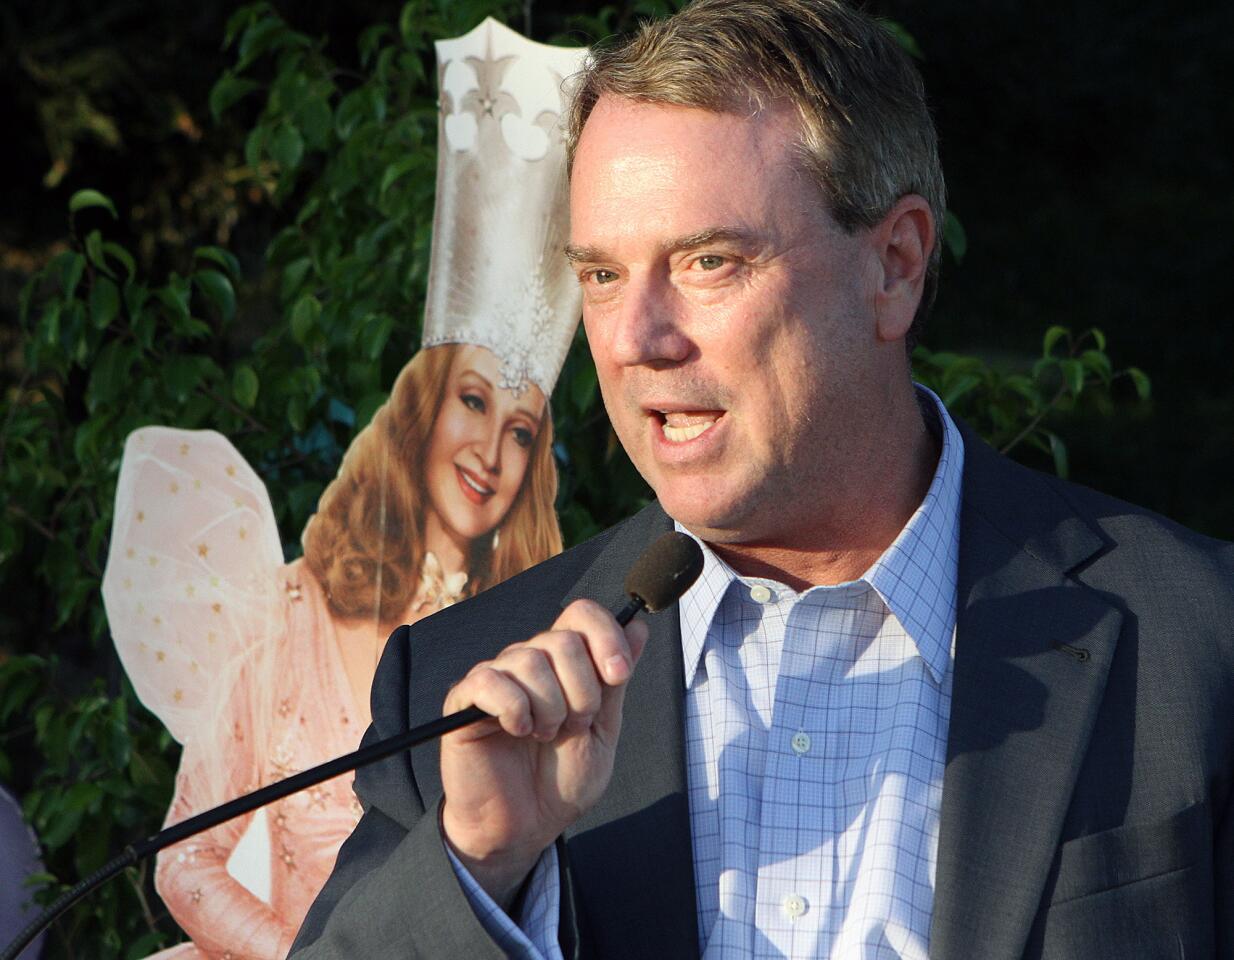 Mayor Pro Tem Jon Curtis, with the Good Witch of the North peaking over his shoulder, talks to the crowd at Olberz Park in La Cañada at the annual La Cañada Flintridge Chamber of Commerce mixer on Thursday, September 17, 2015.